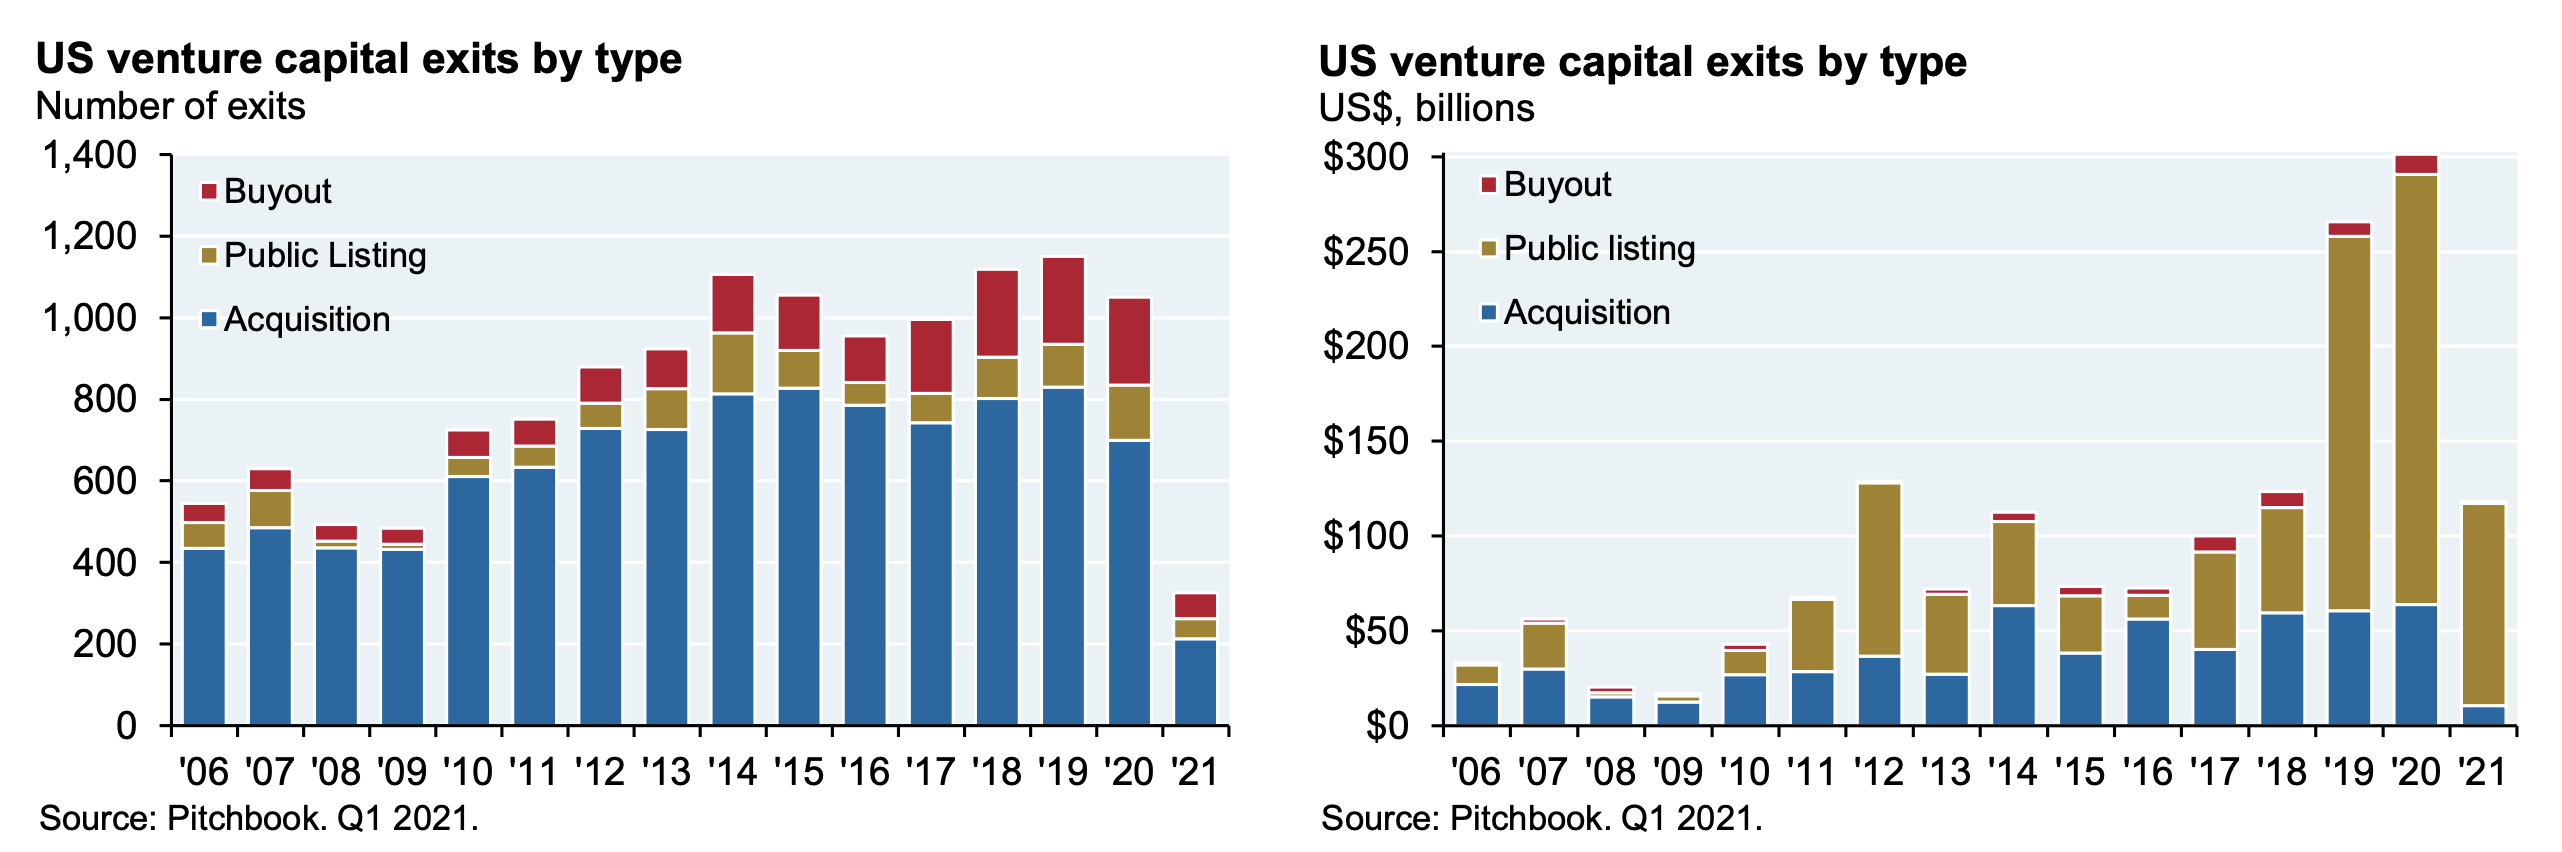 US venture capital exits by type